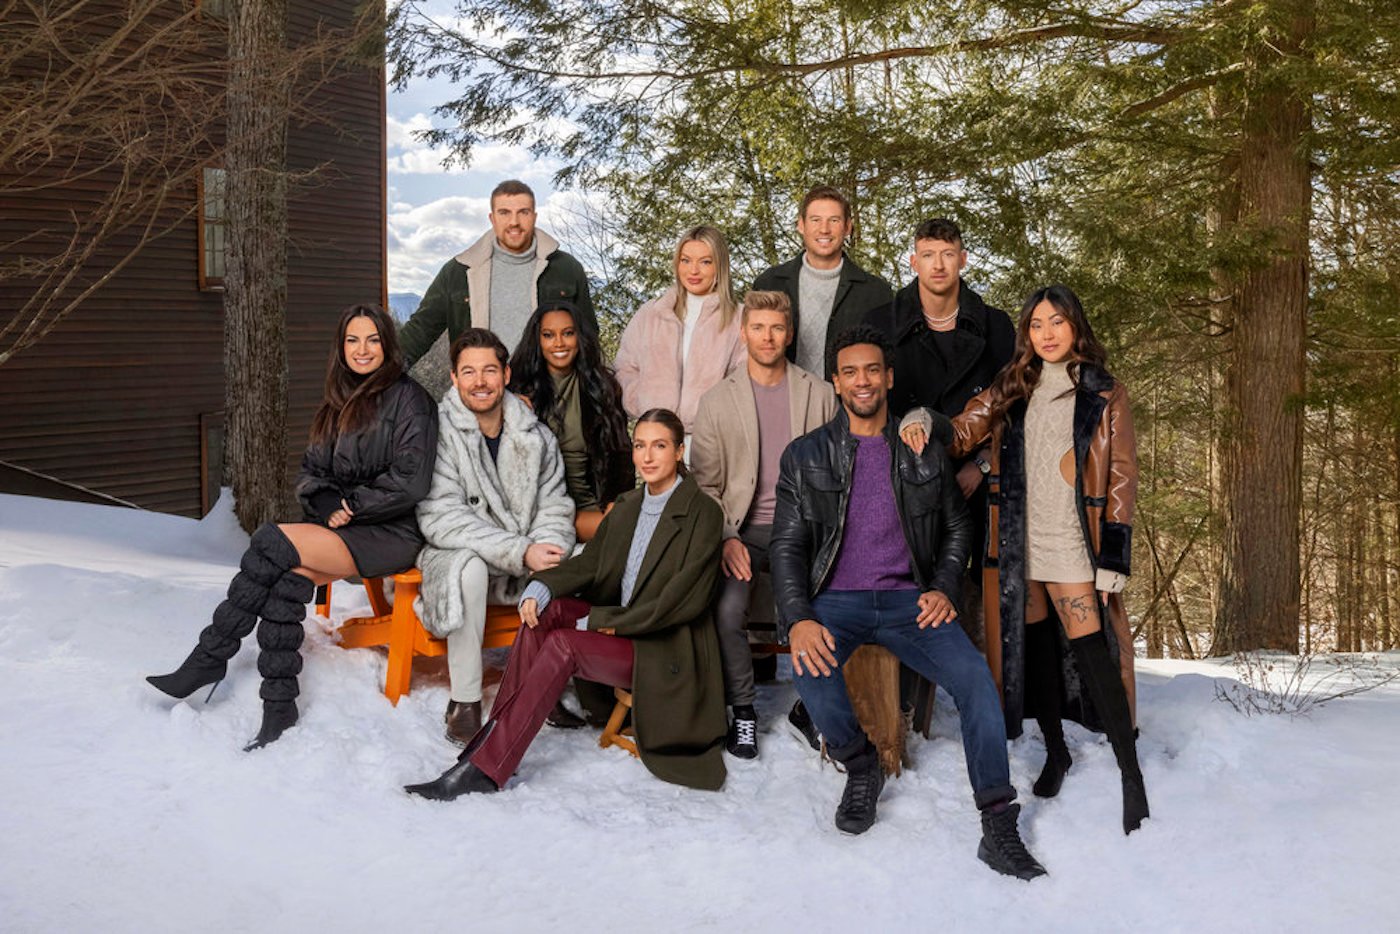 Winter House Season 2 cast poses in the snow. 